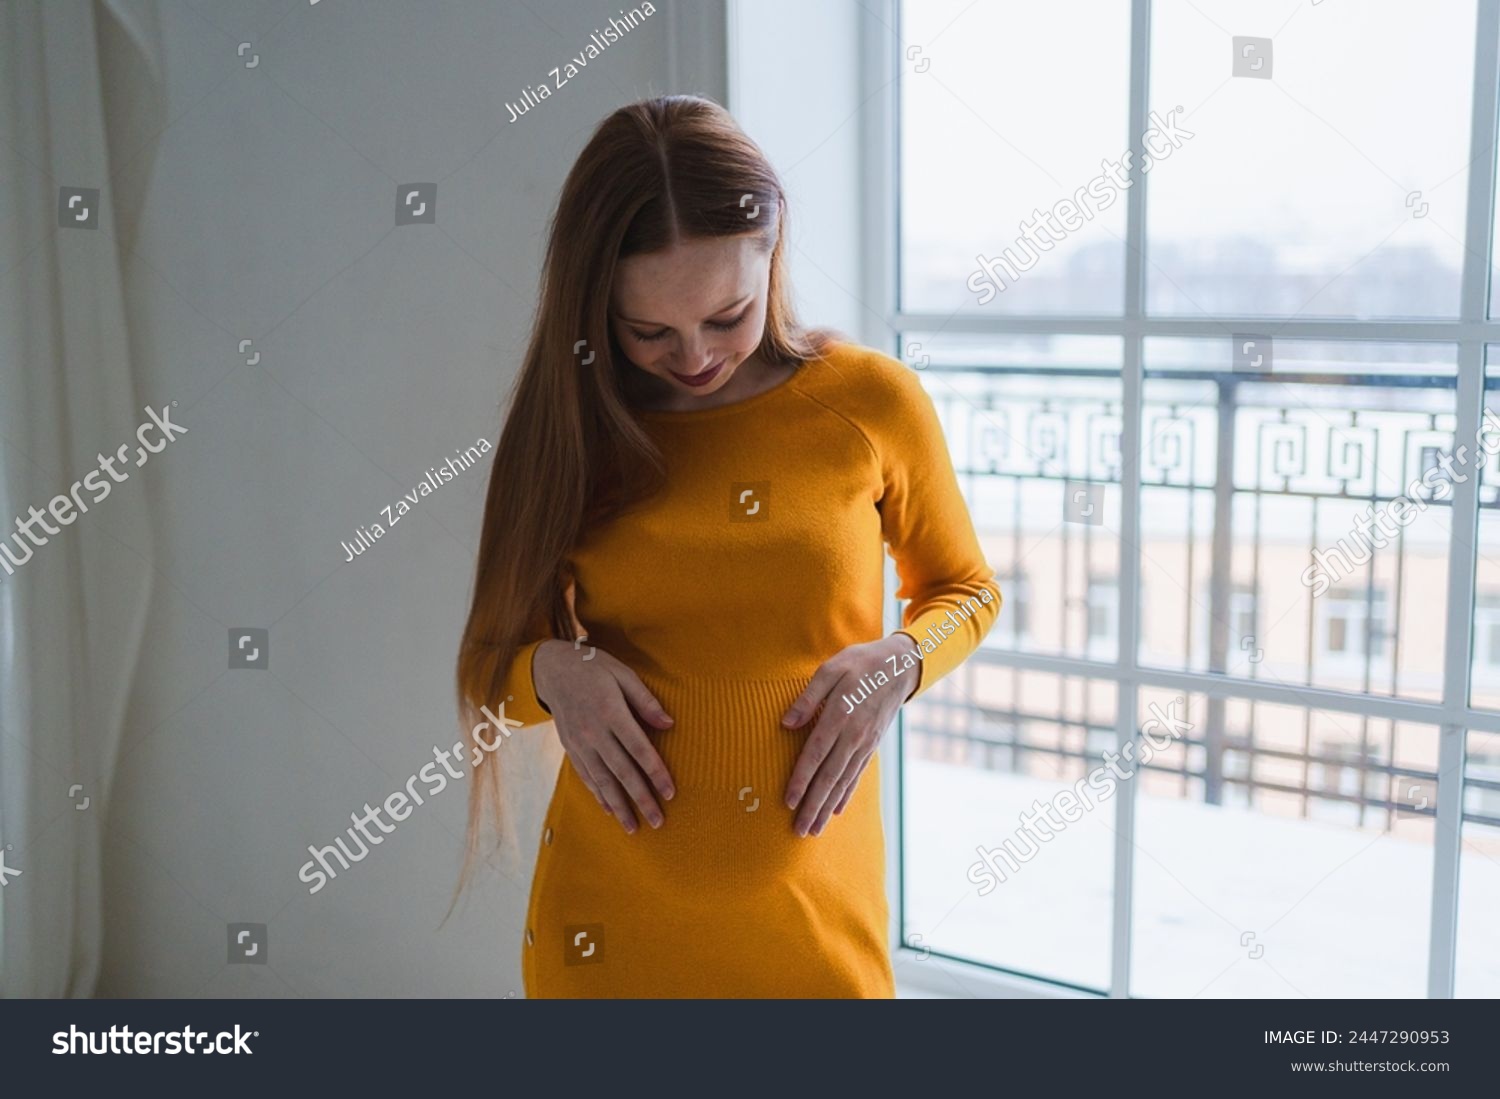 Pregnancy motherhood people expectation future. Pregnant woman with big belly standing near window at home. Girl hugging her tummy enjoying pregnancy. Maternity tenderness parenthood new life concept #2447290953